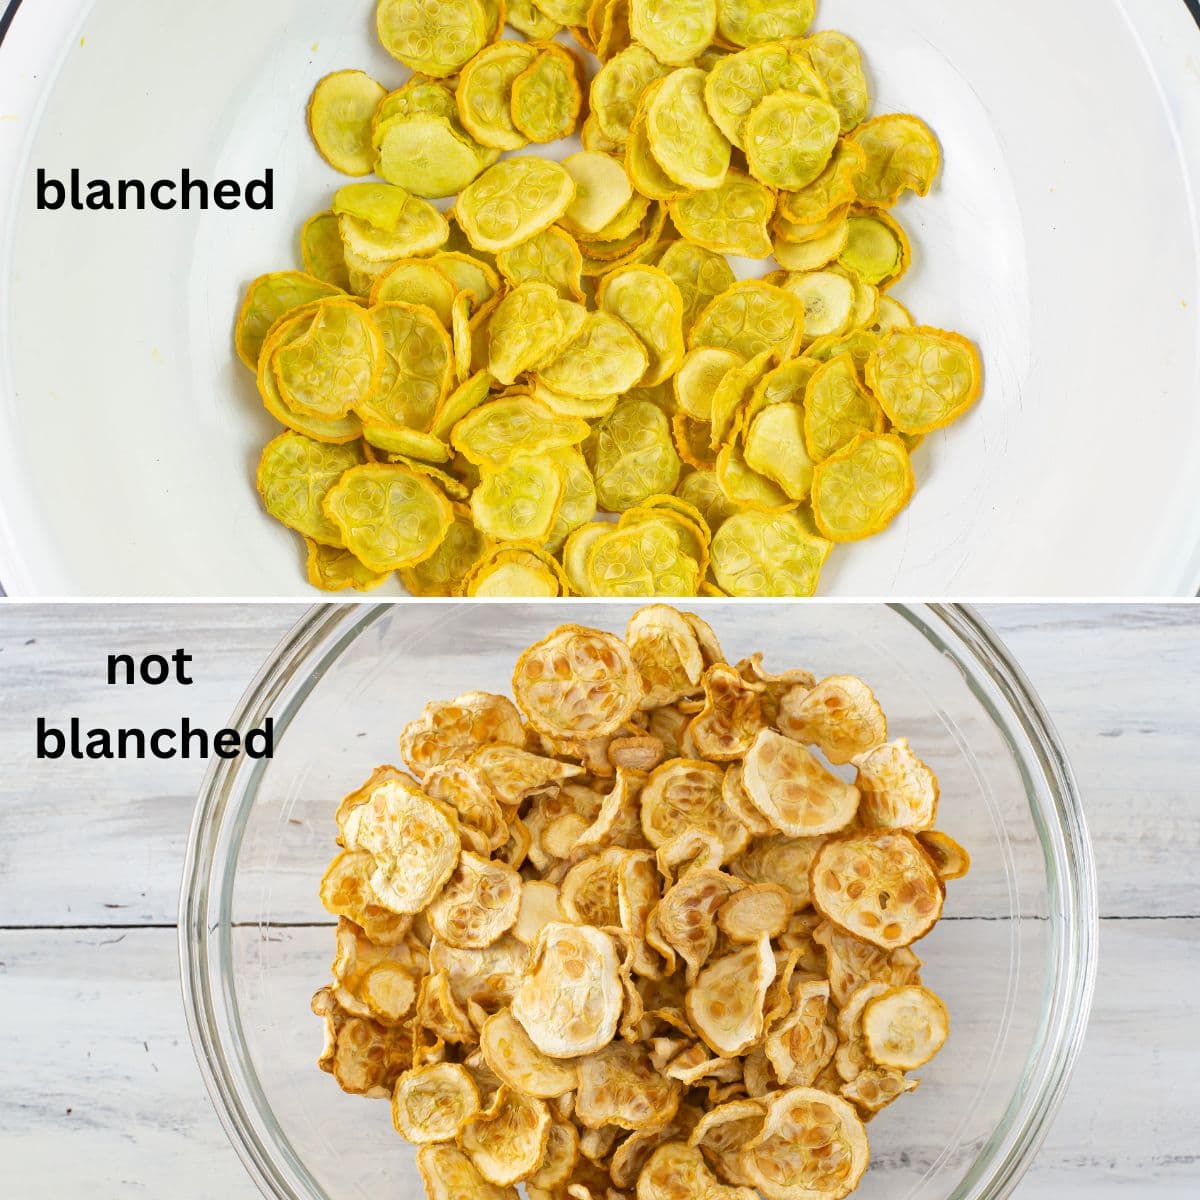 A comparison of the bright blanched and darkened unblanched dehydrated yellow squash slices.